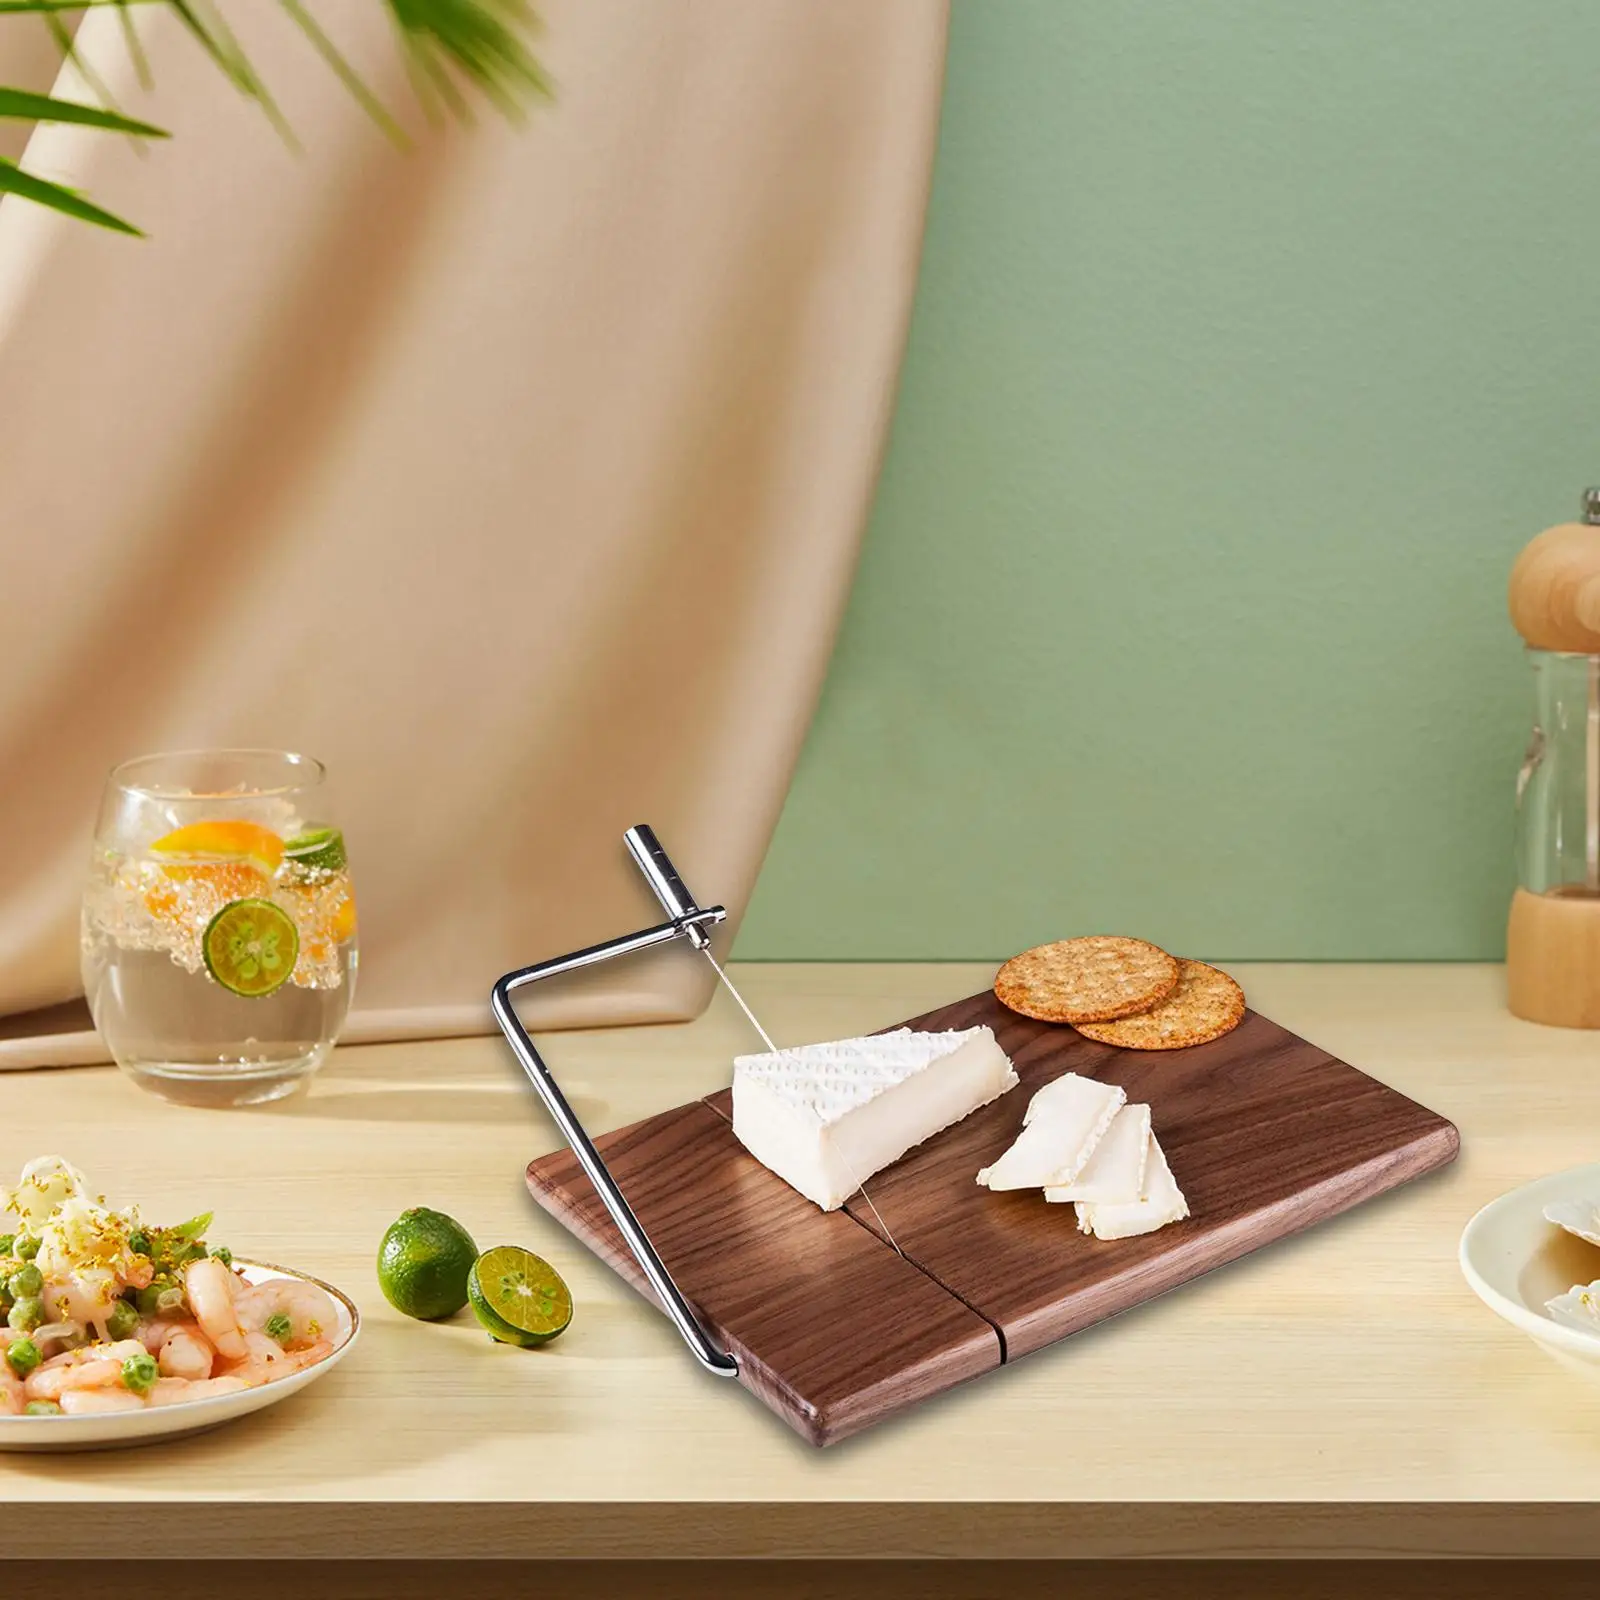 Wood Serving Board with Cheese Slicer Butter Dessert Food Slicer for Vegetables Handcrafted Soaps Tofu Butter Housewarming Gifts